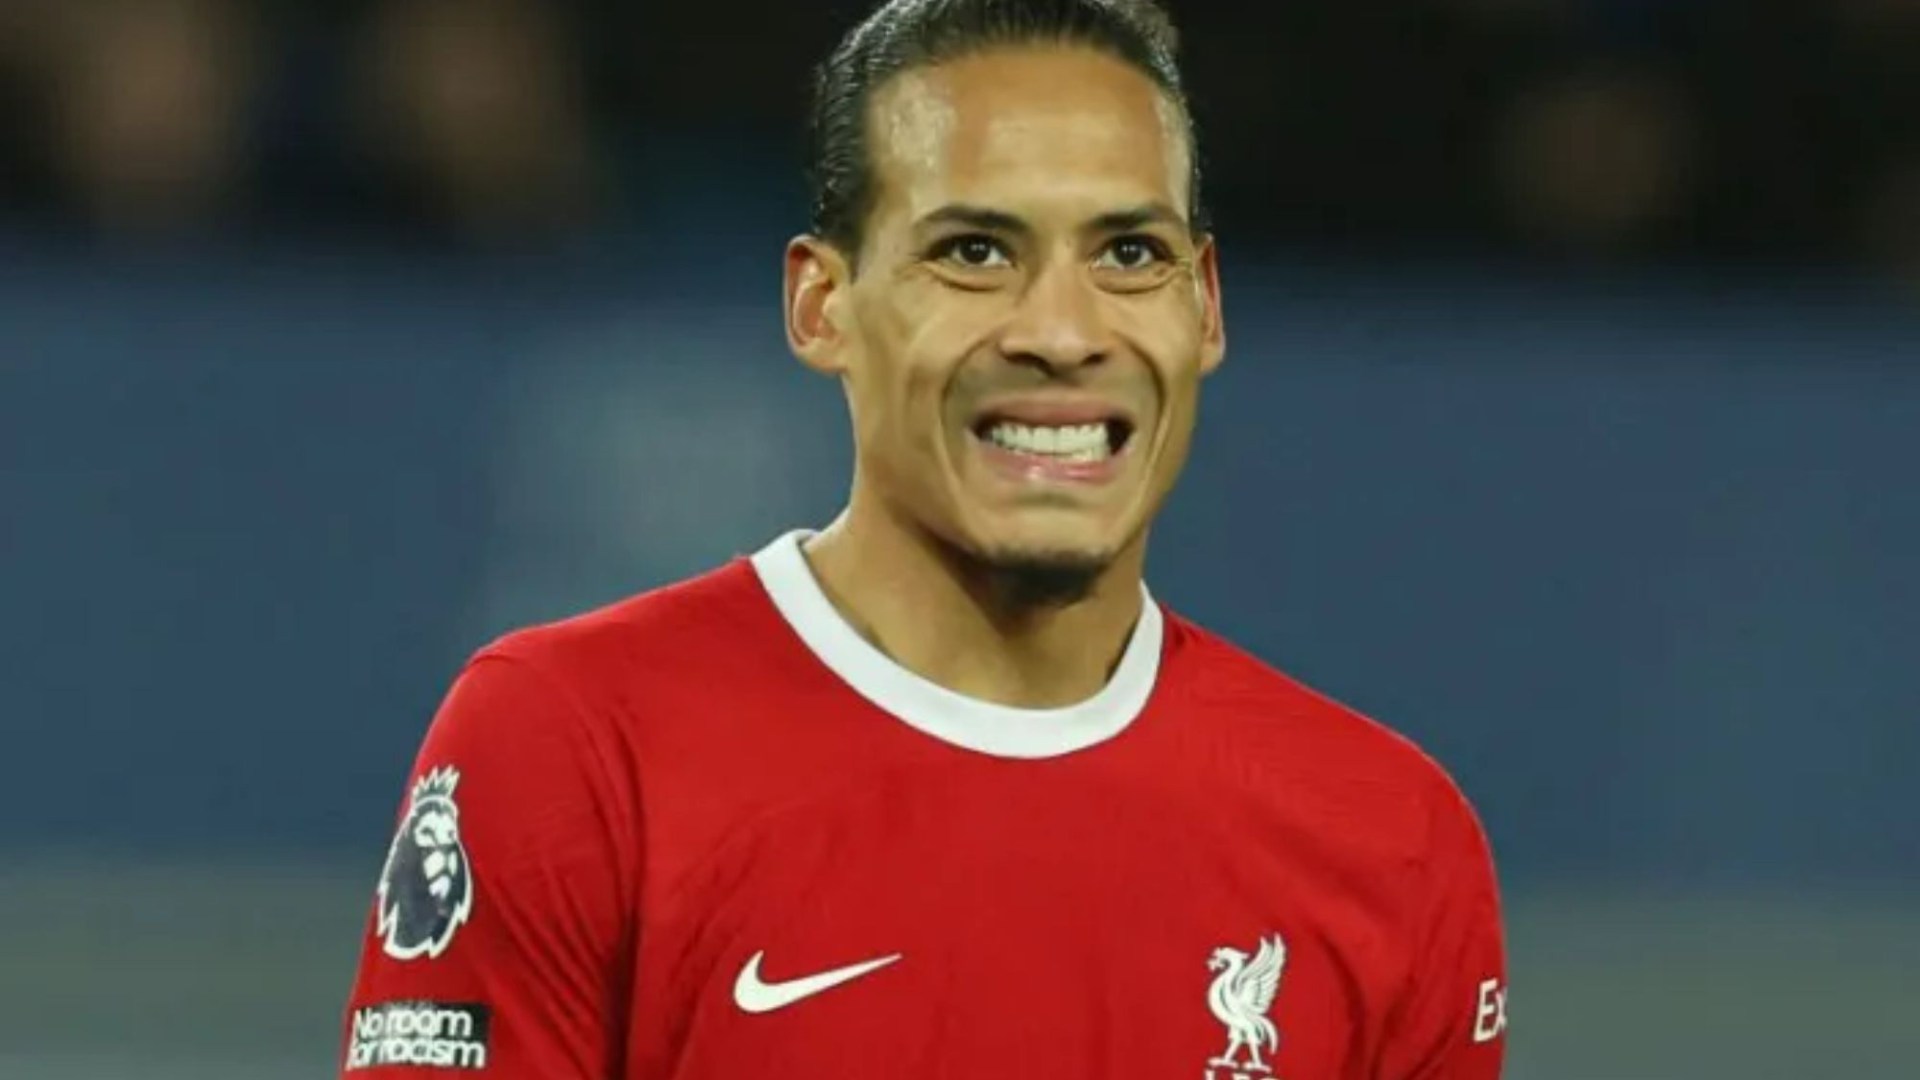 Van Dijk is obviously unhappy and could quit Liverpool, they have big questions over their character, says club legend [Video]